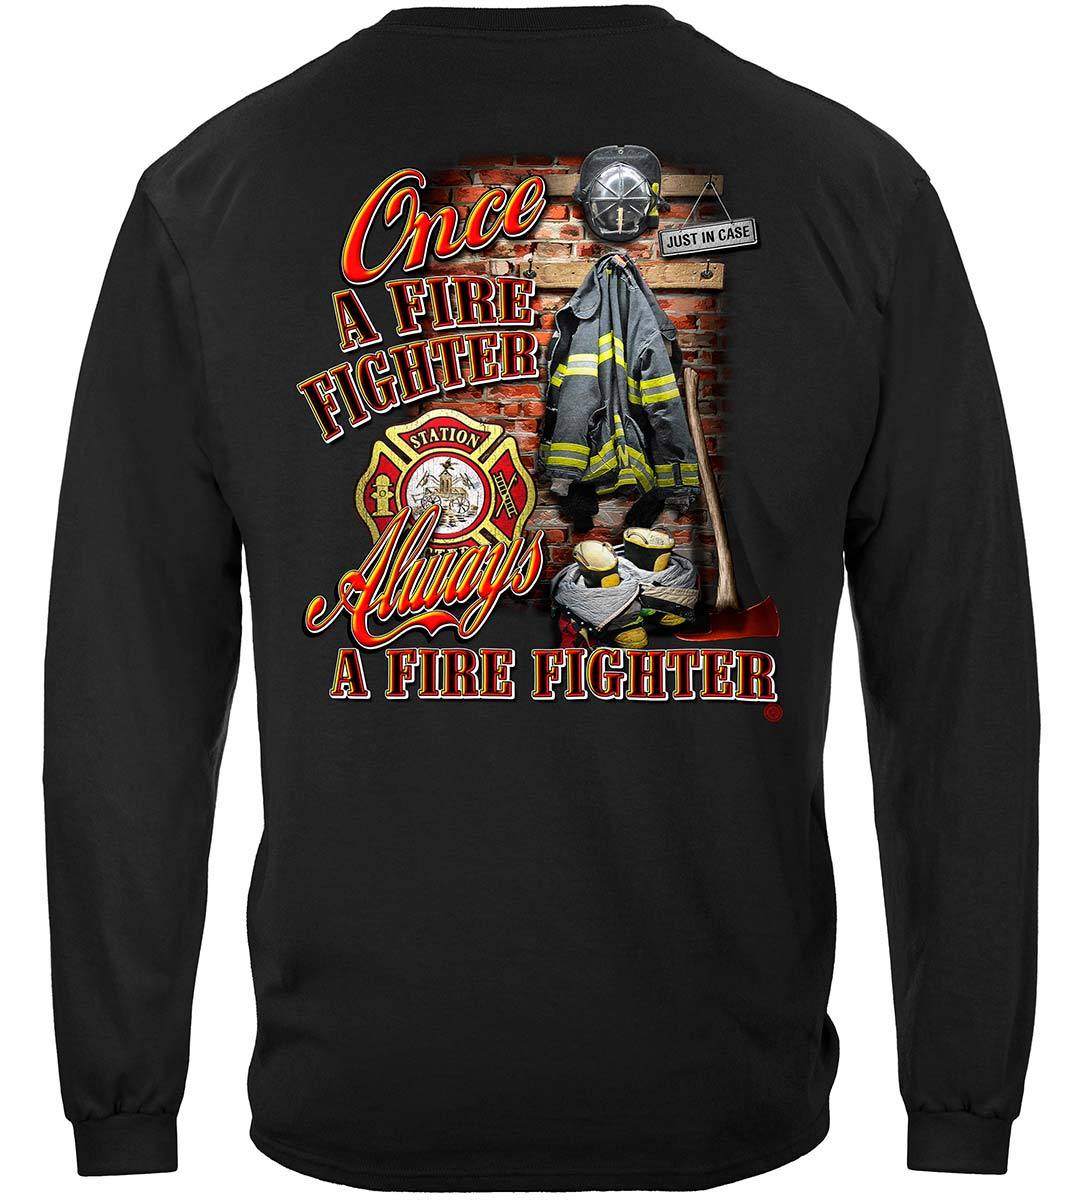 Once And Always a Firefighter Premium Long Sleeves